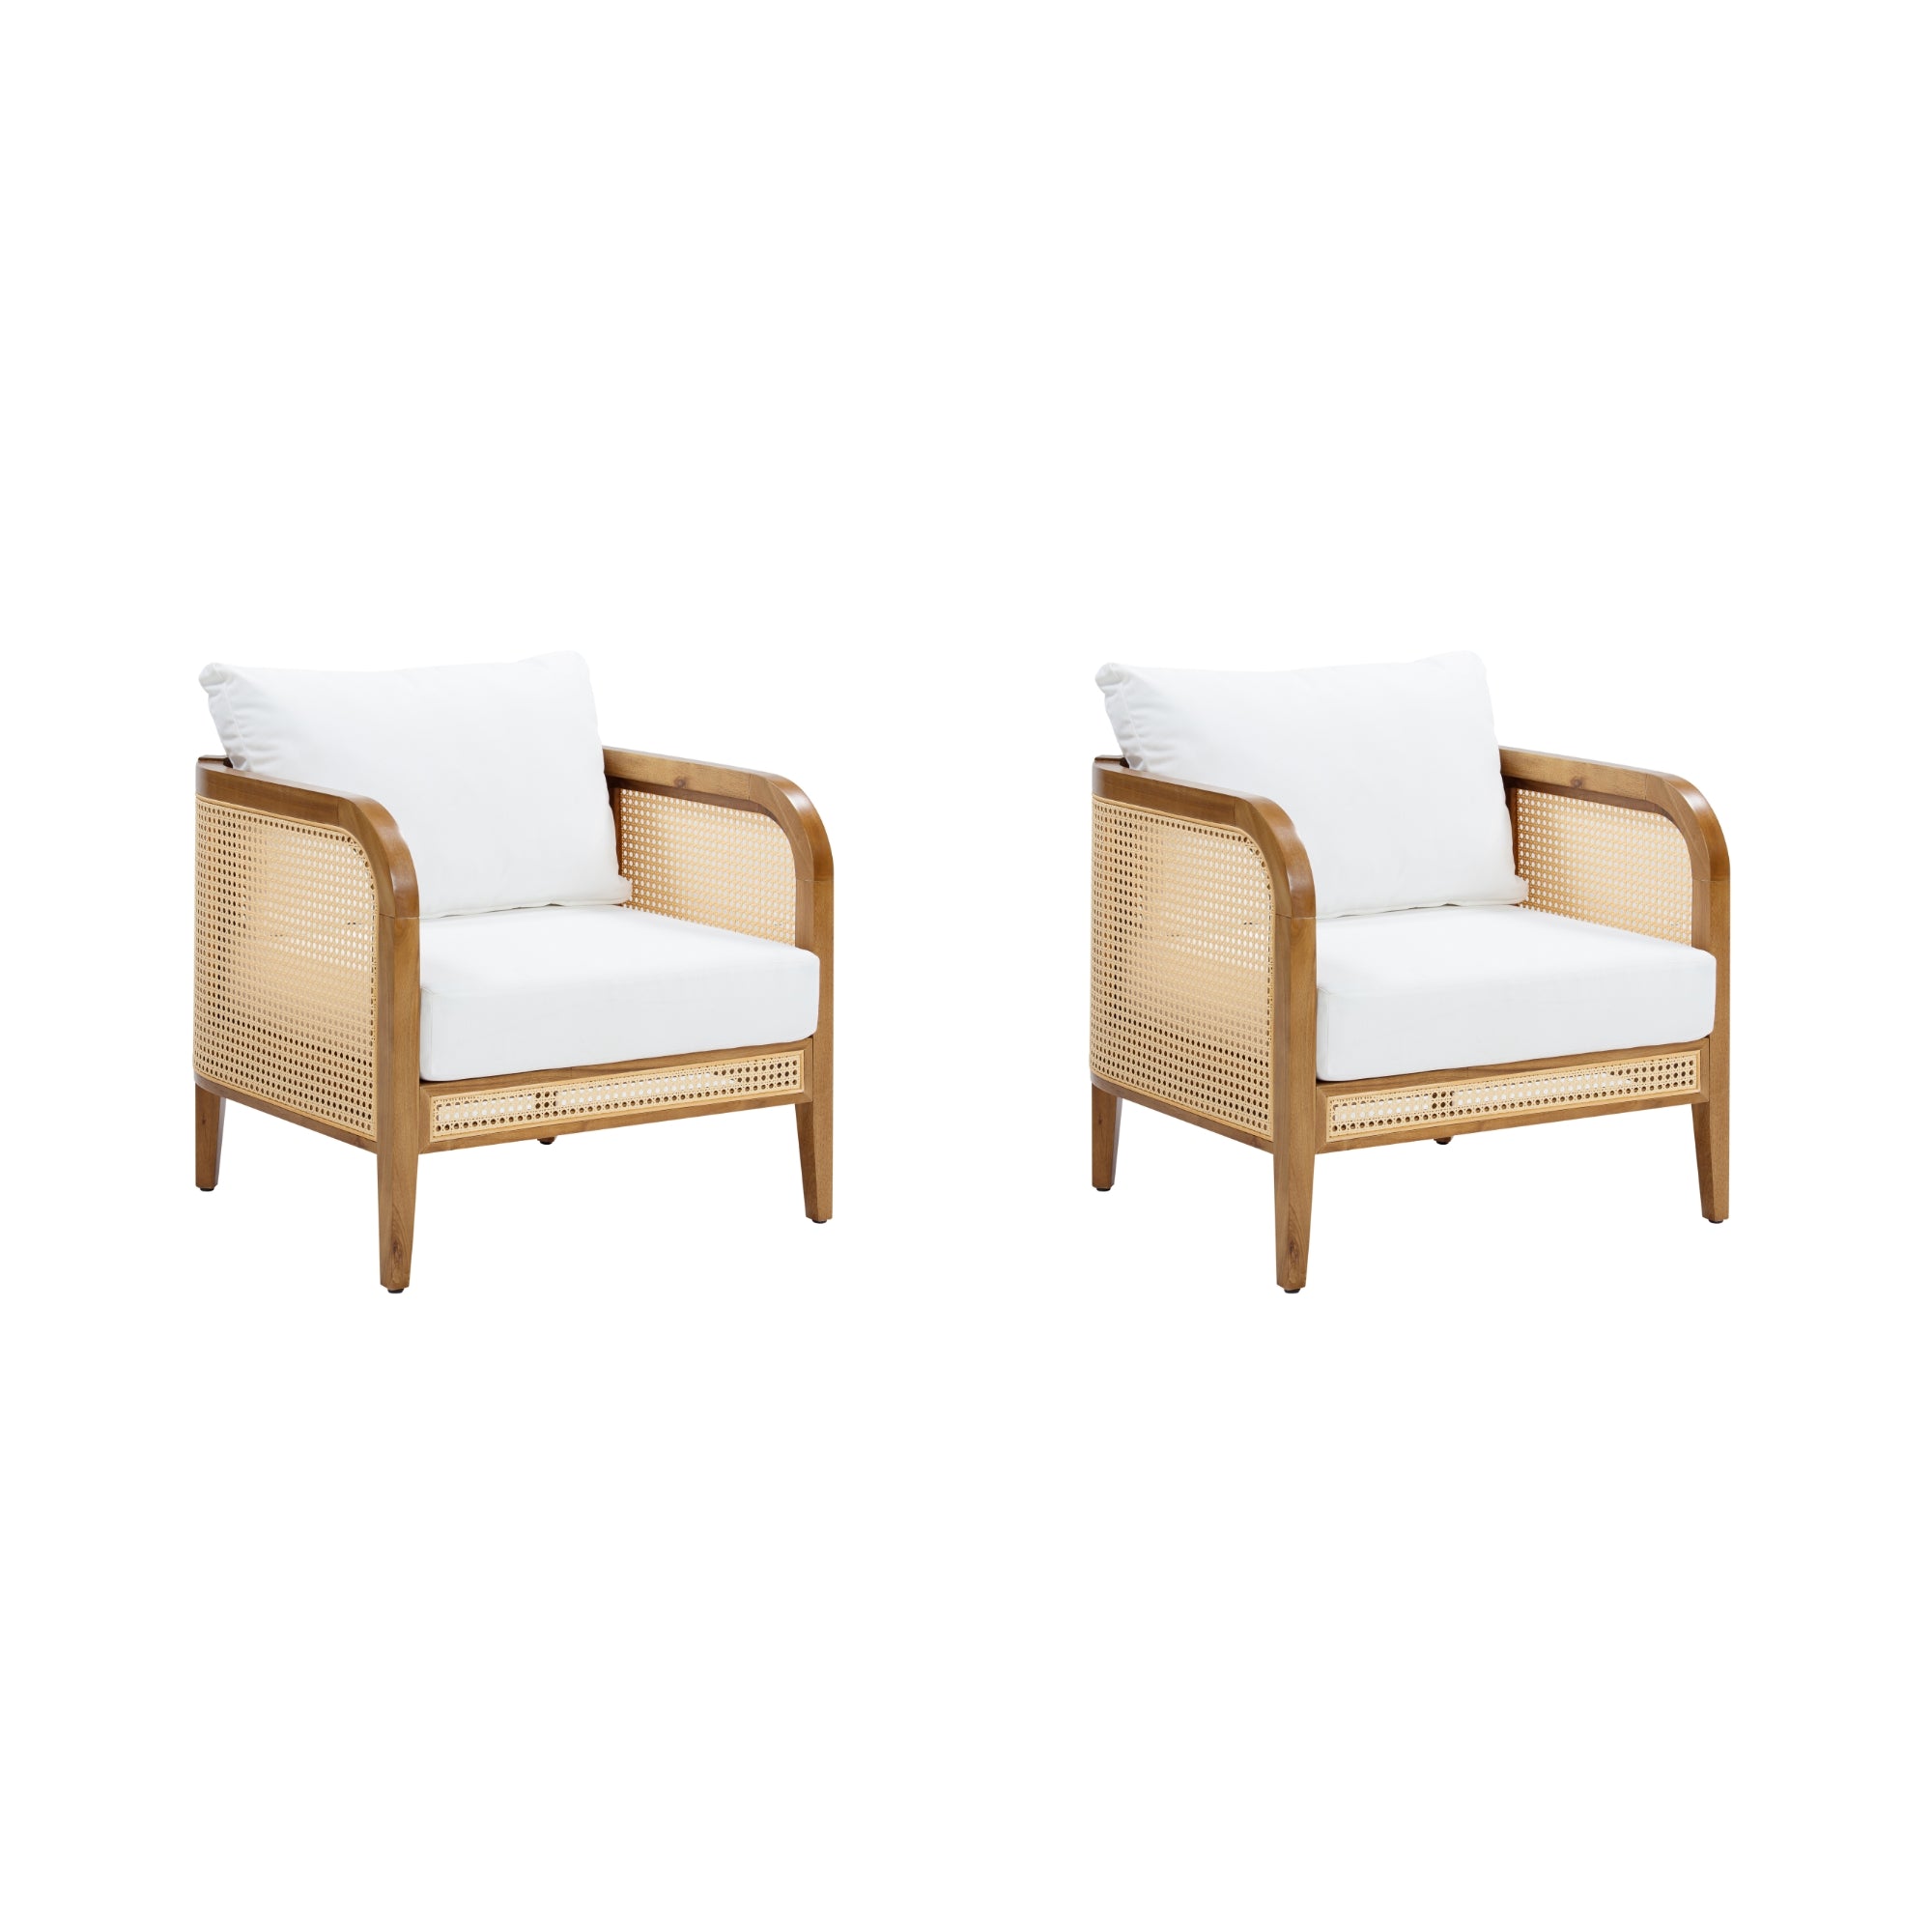 Set of 2 Rattan Outdoor Patio Arm Chairs